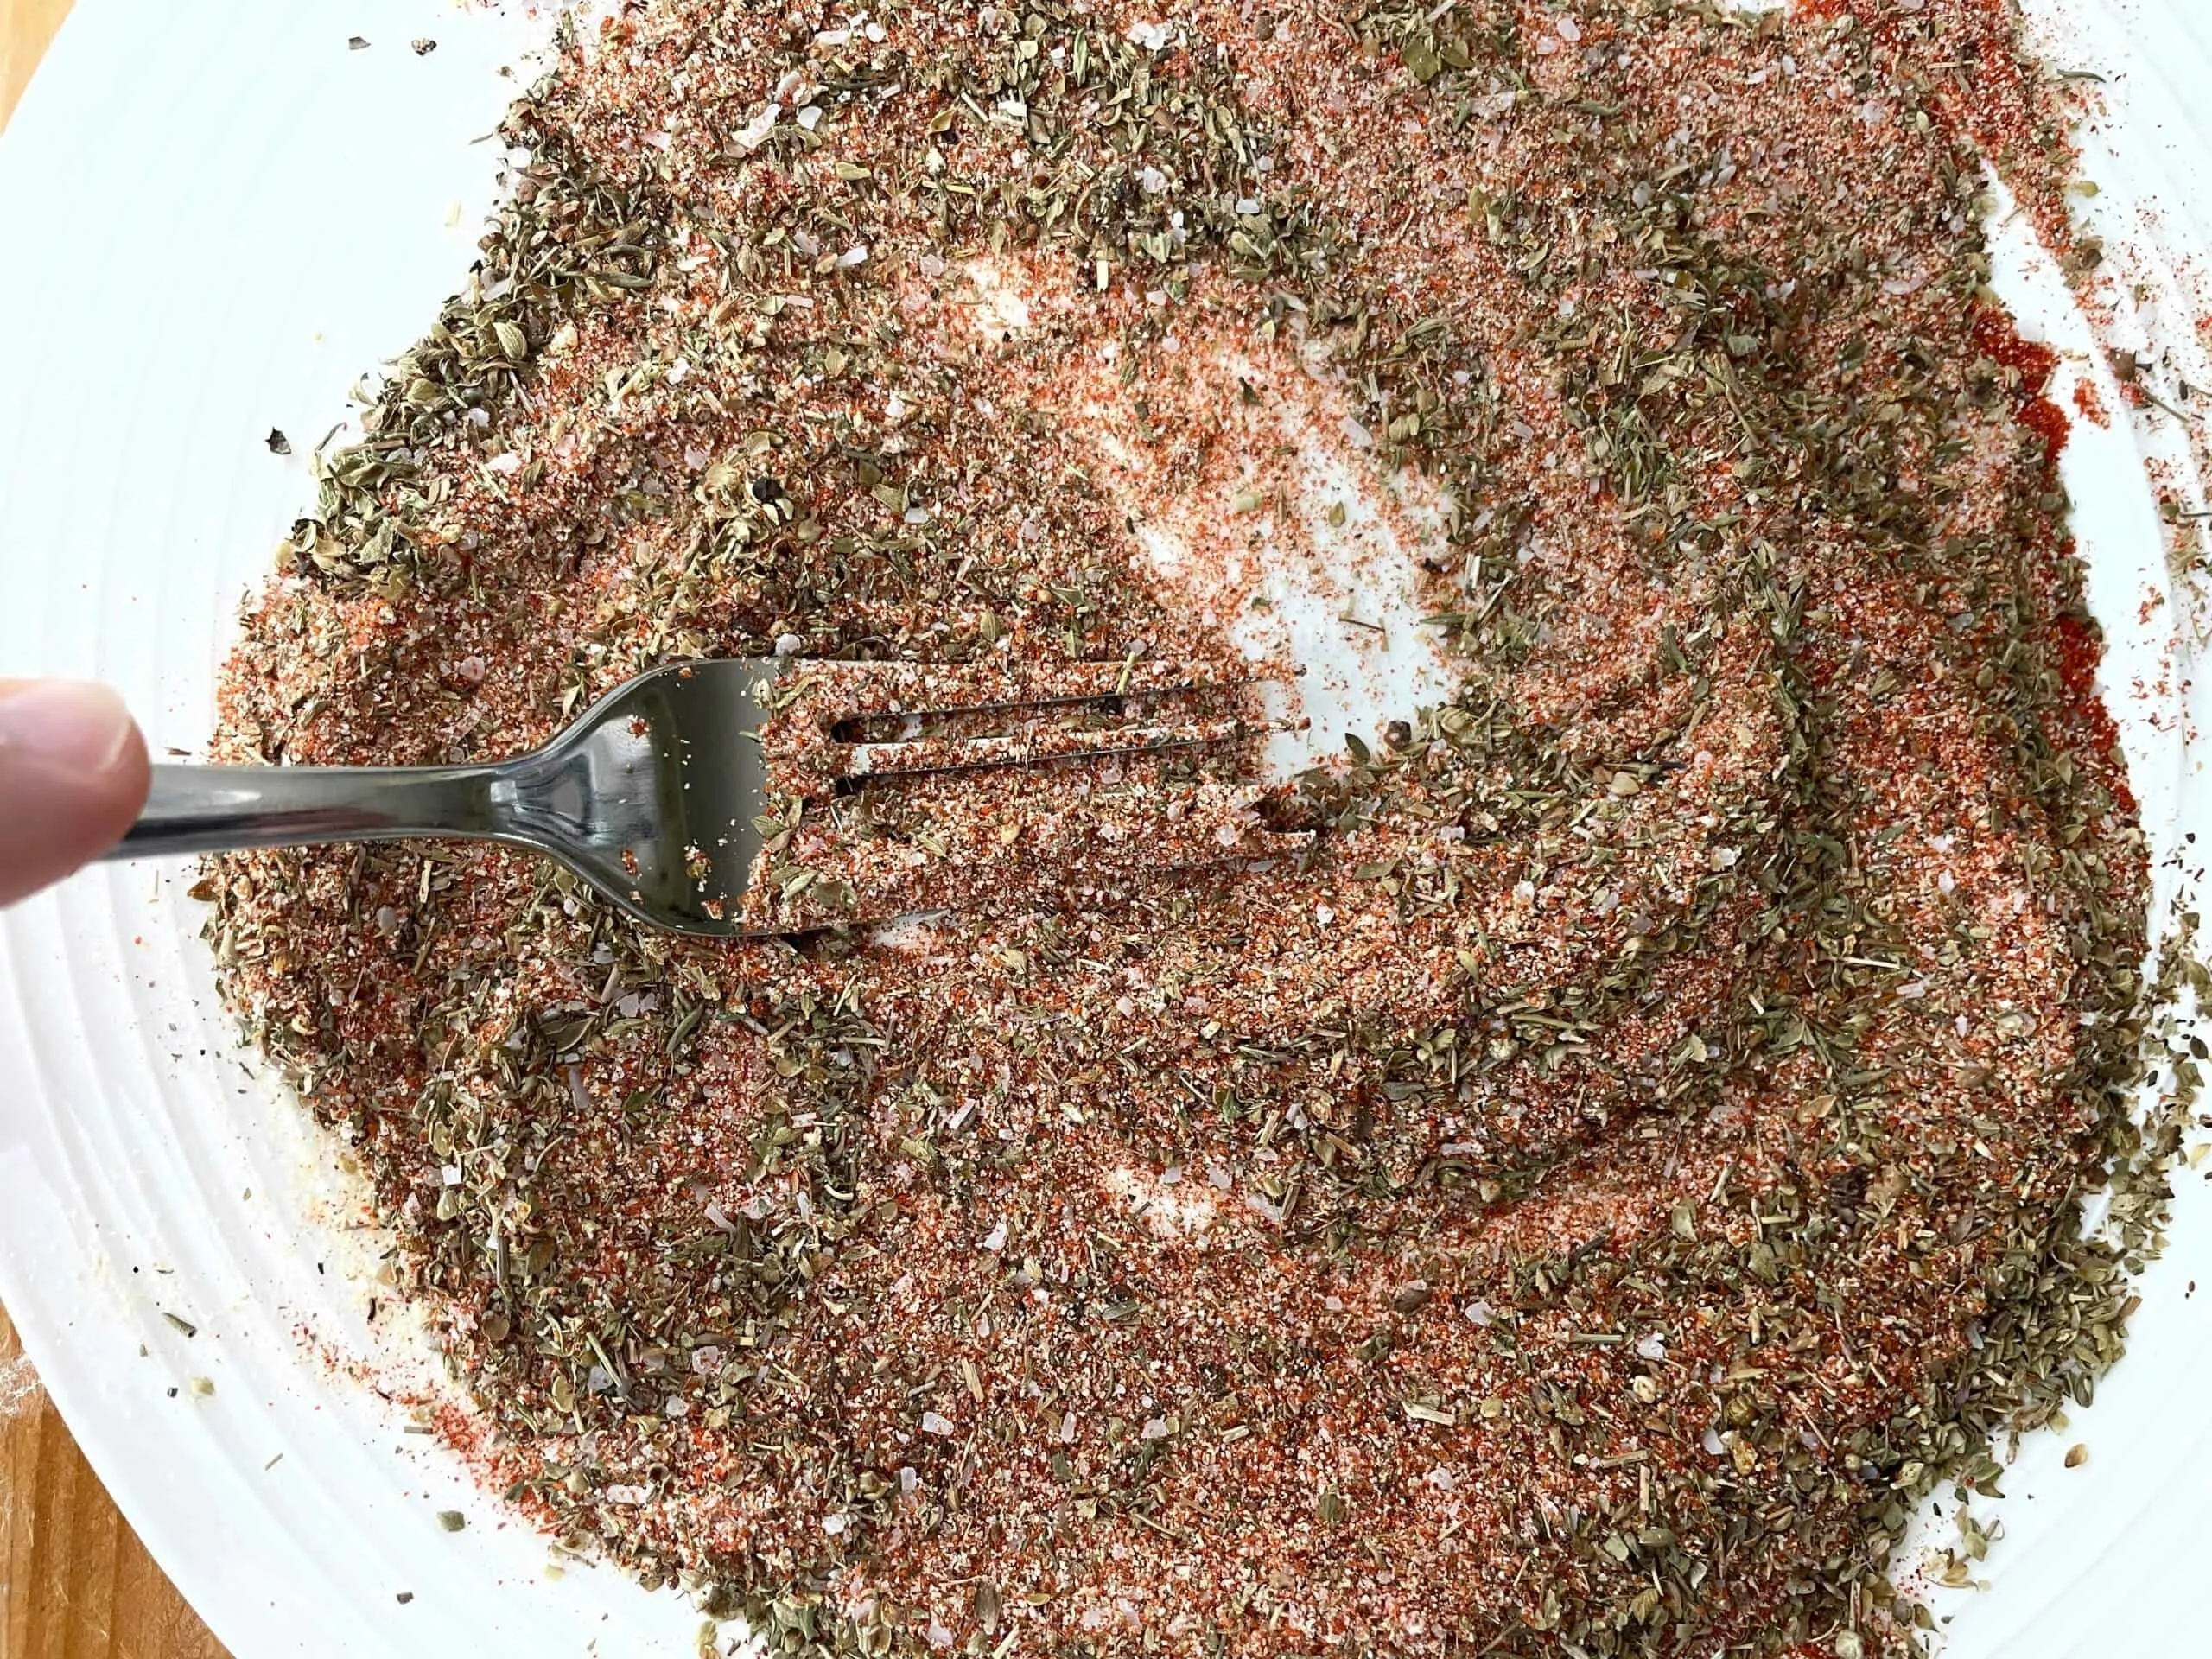 https://southernfoodjunkie.com/wp-content/uploads/2022/05/Mixing-the-chicken-seasoning-2-scaled.jpg.webp